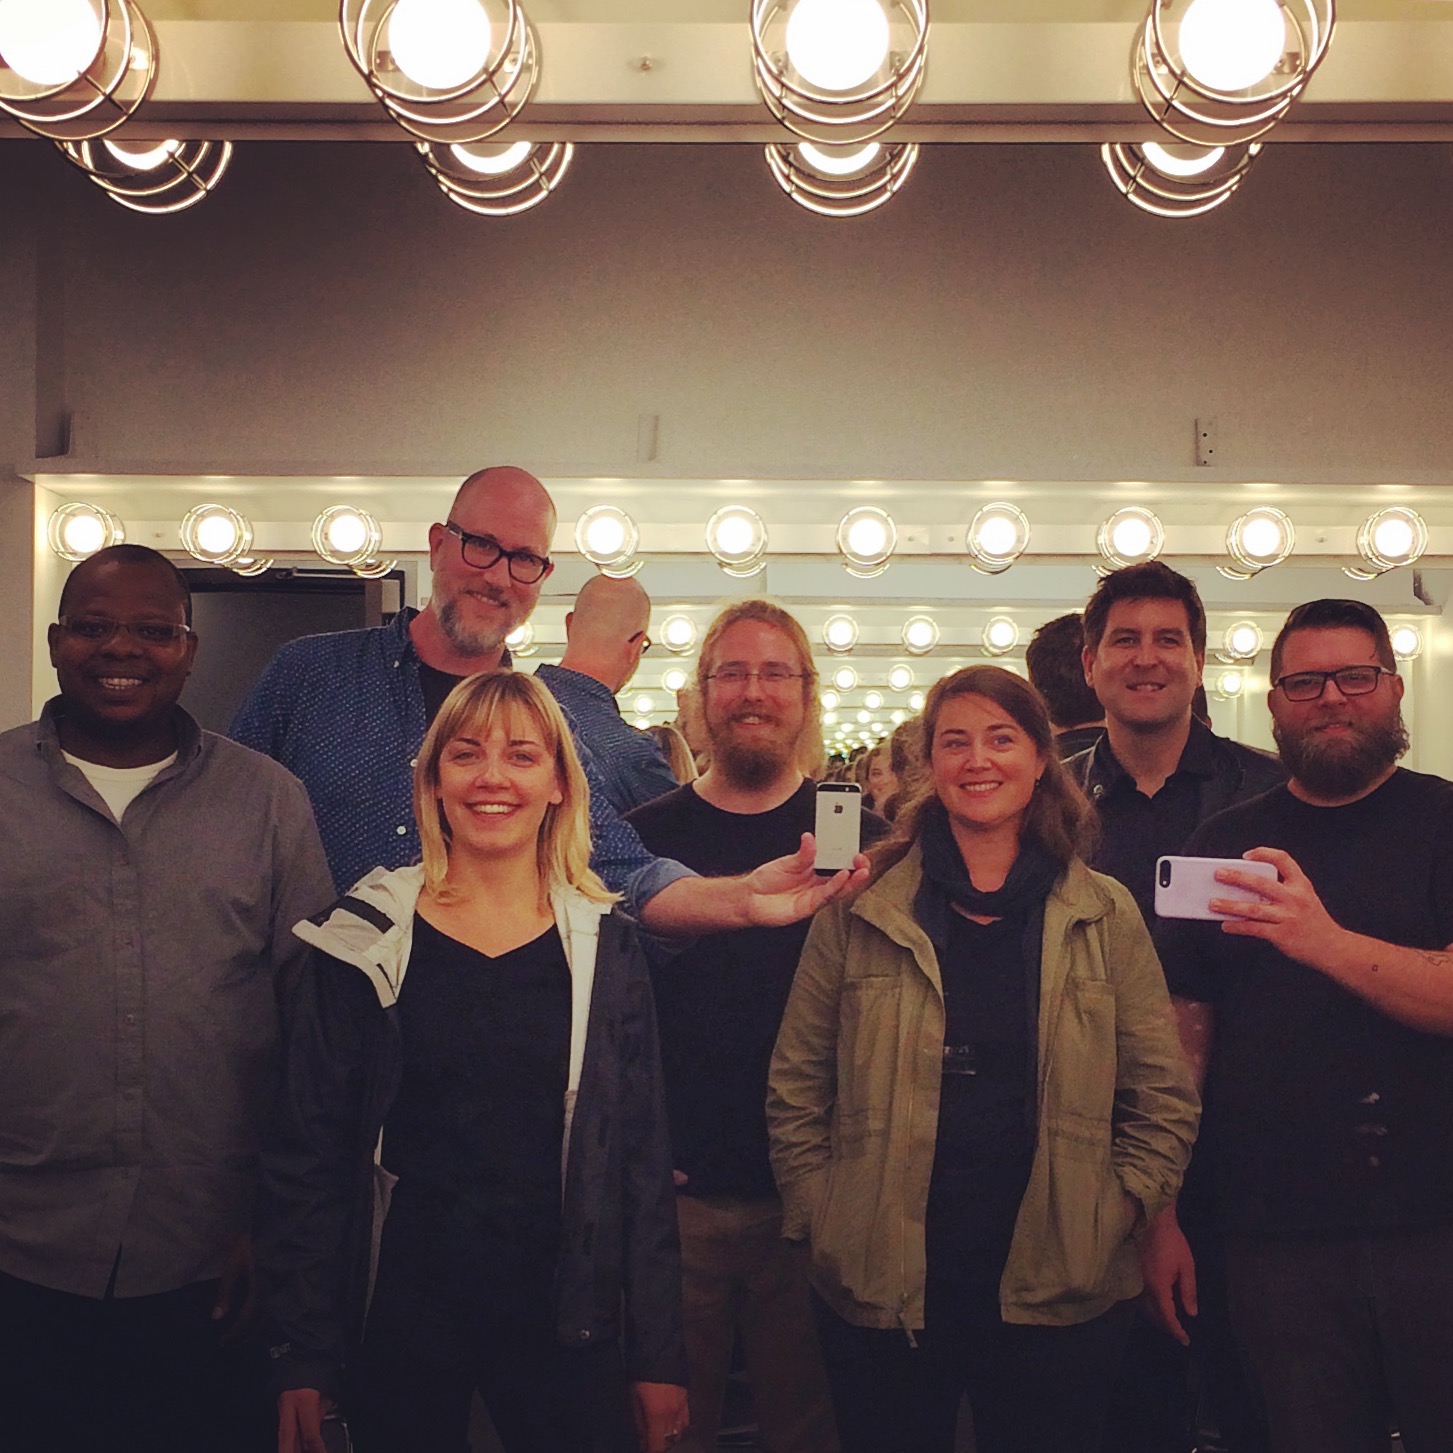  Post-show infinity mirror self portrait (missing: Anna Roberts-Gevalt). Such a great ensemble of musicians! 